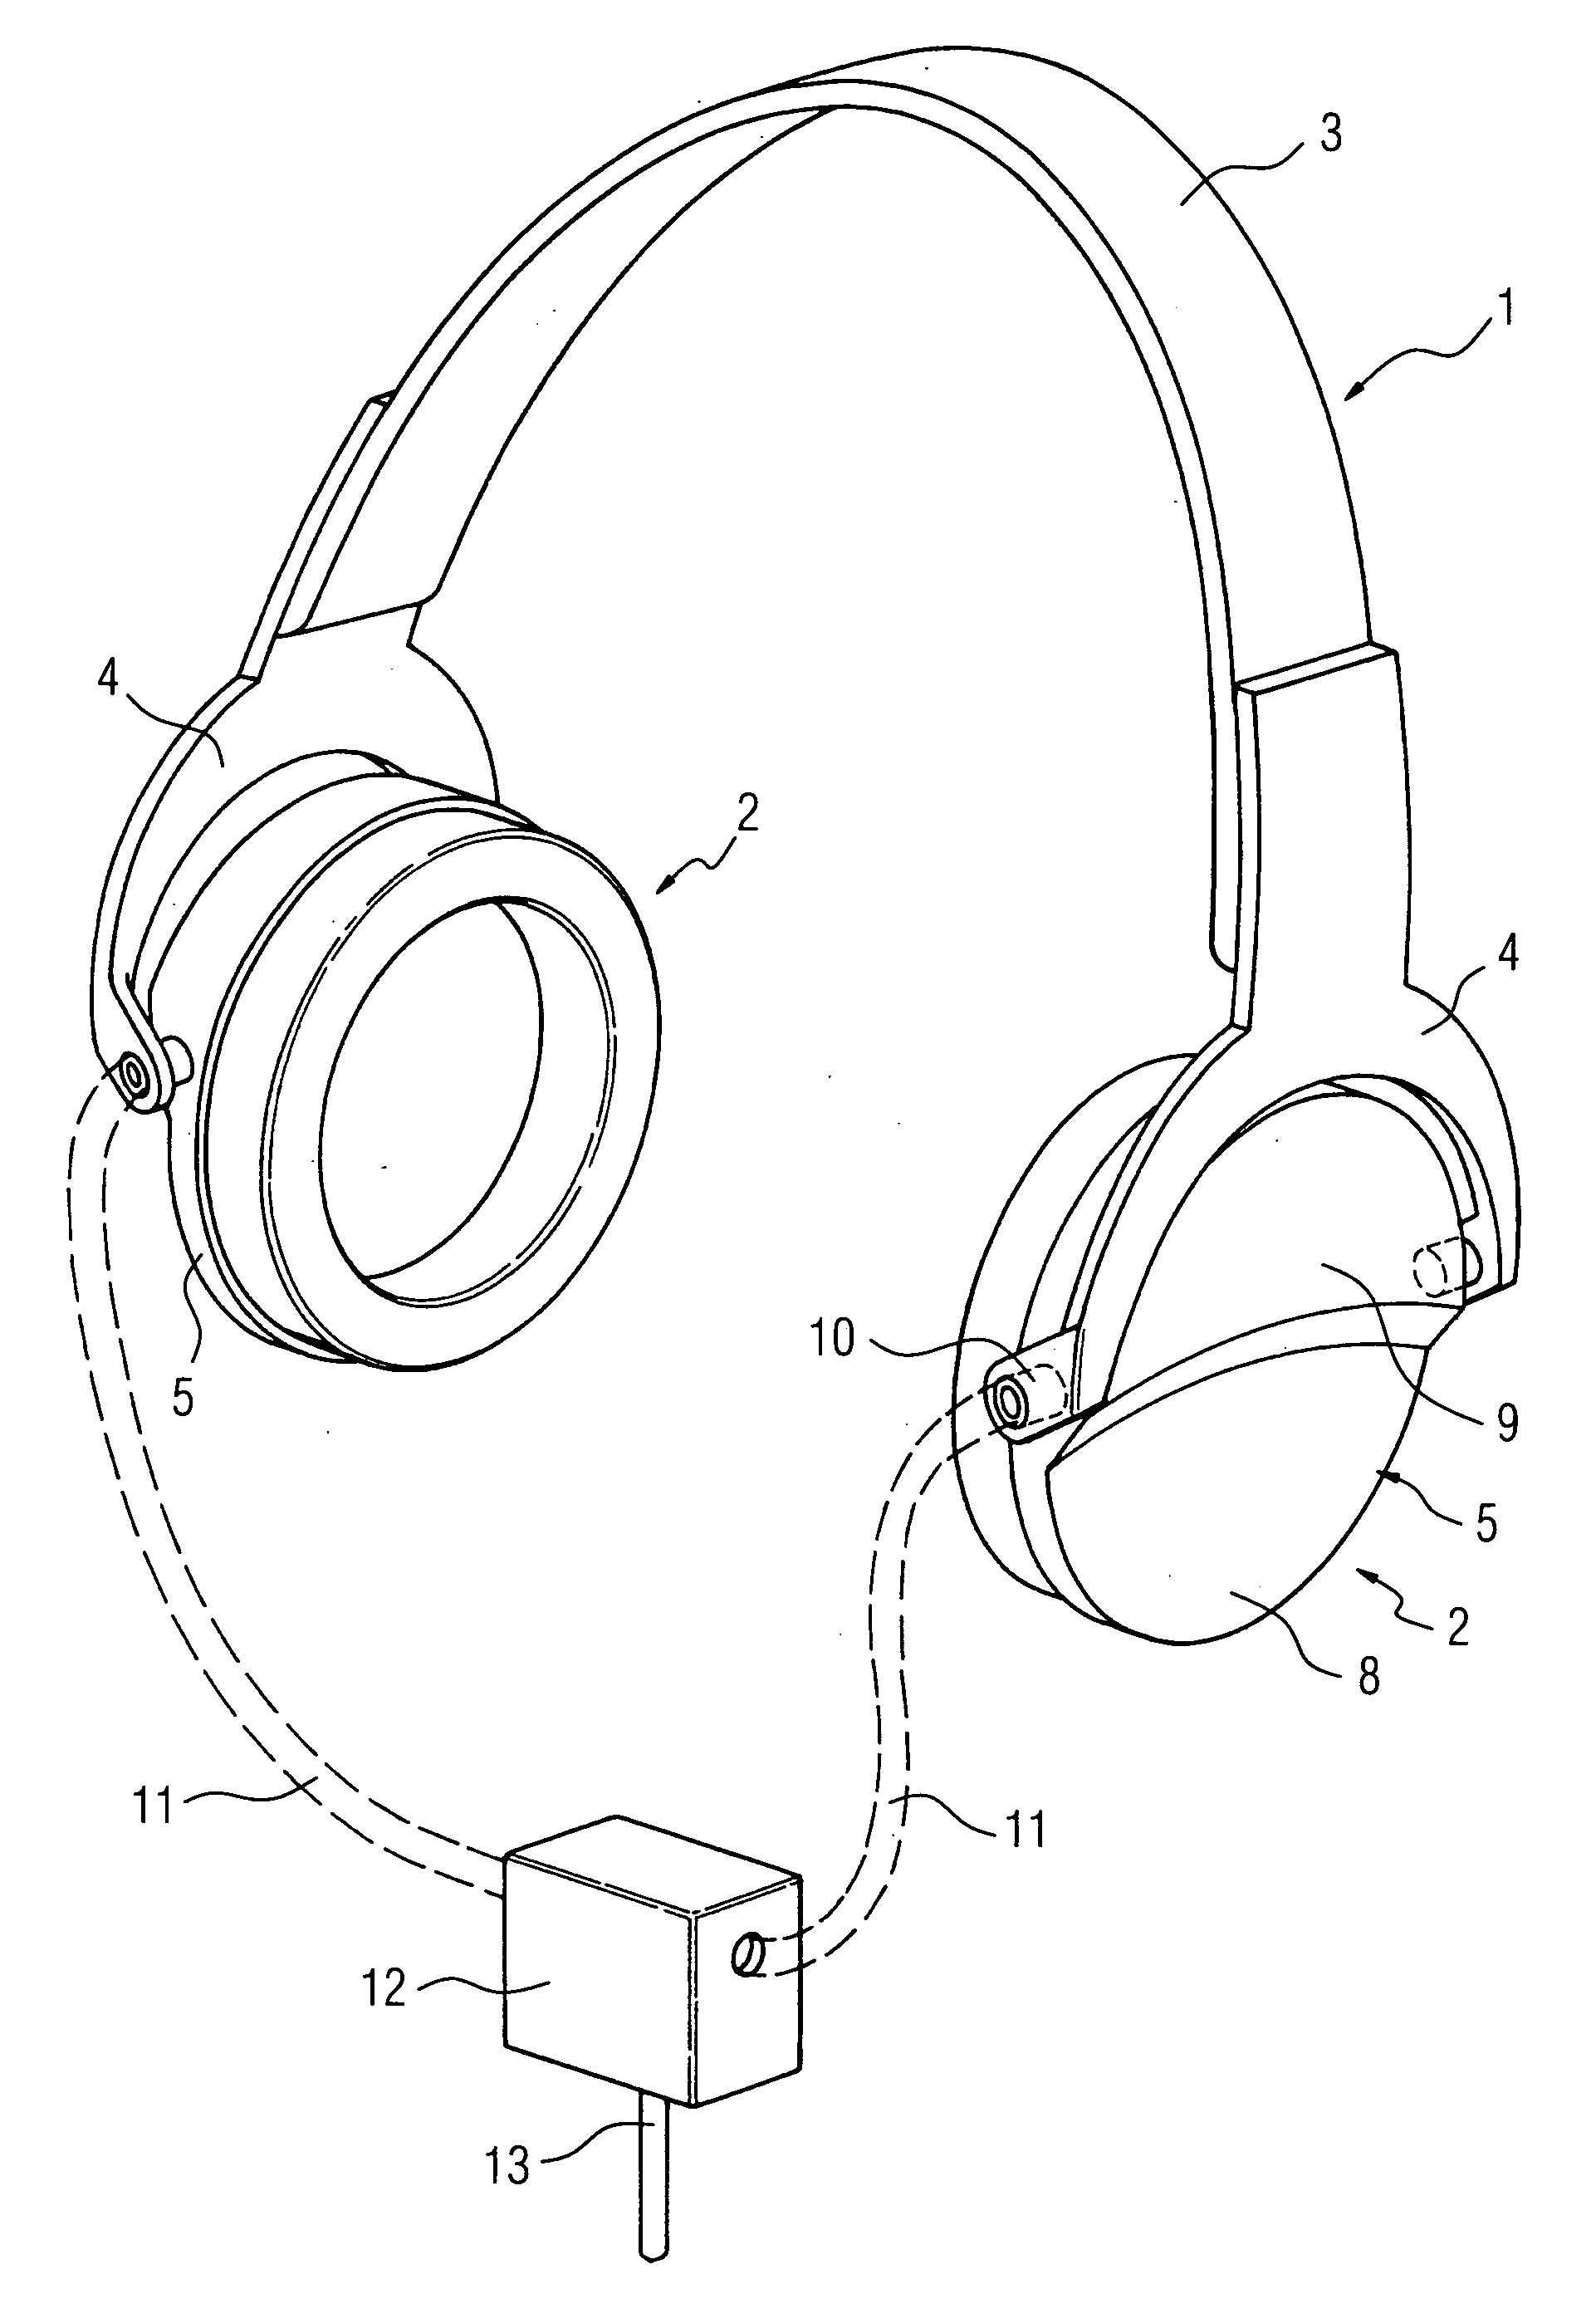 Hearing protection for use in magnetic resonance facilities